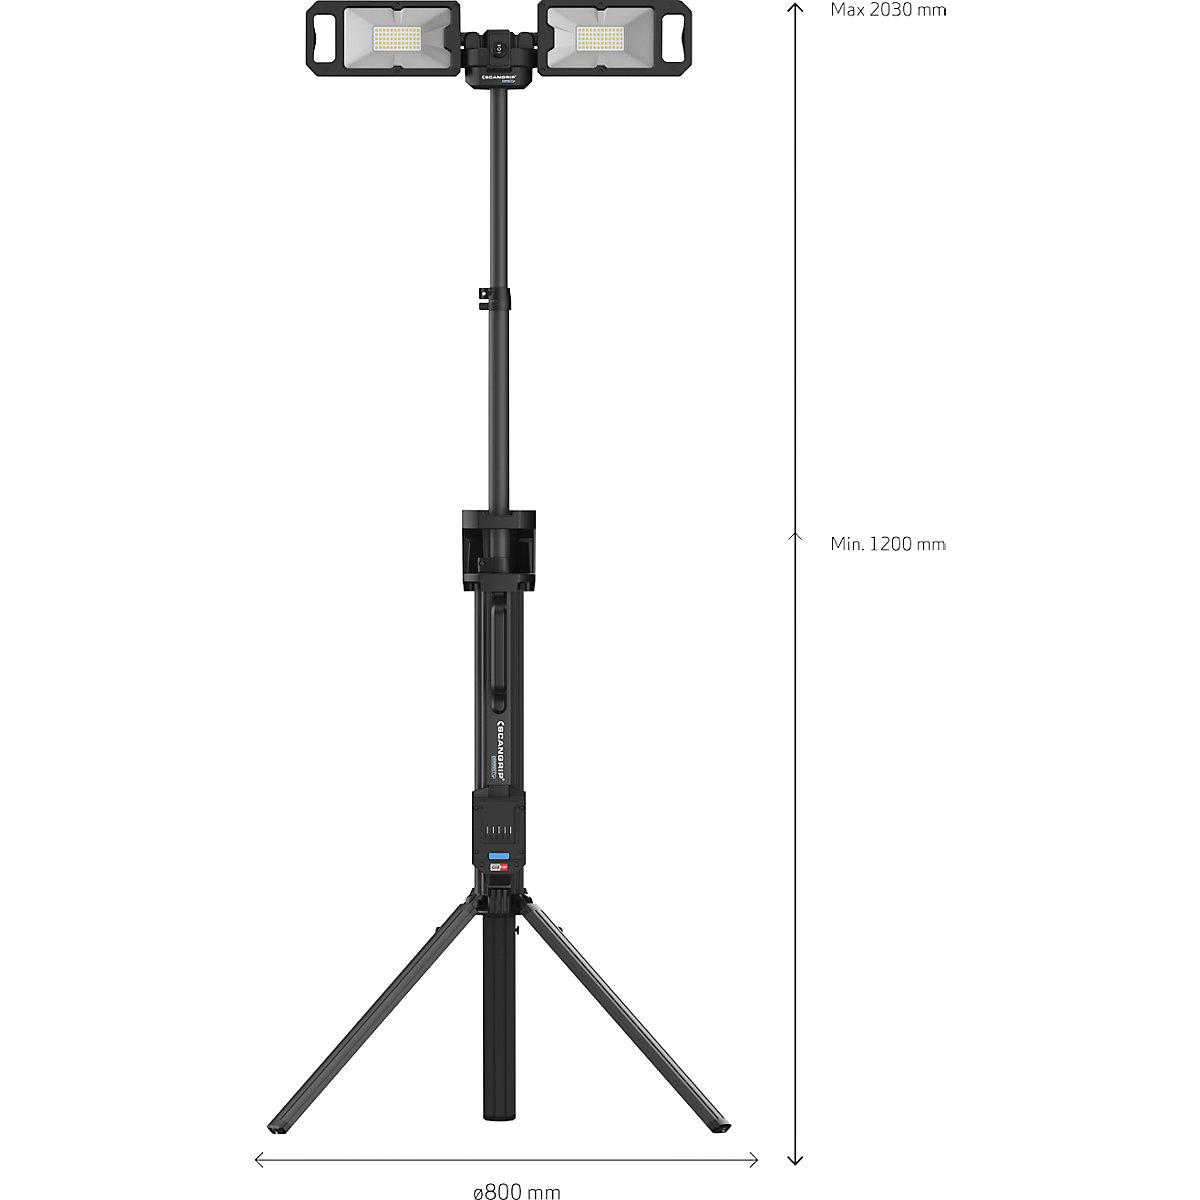 LED-bouwlamp TOWER 5 CONNECT – SCANGRIP (Productafbeelding 10)-9